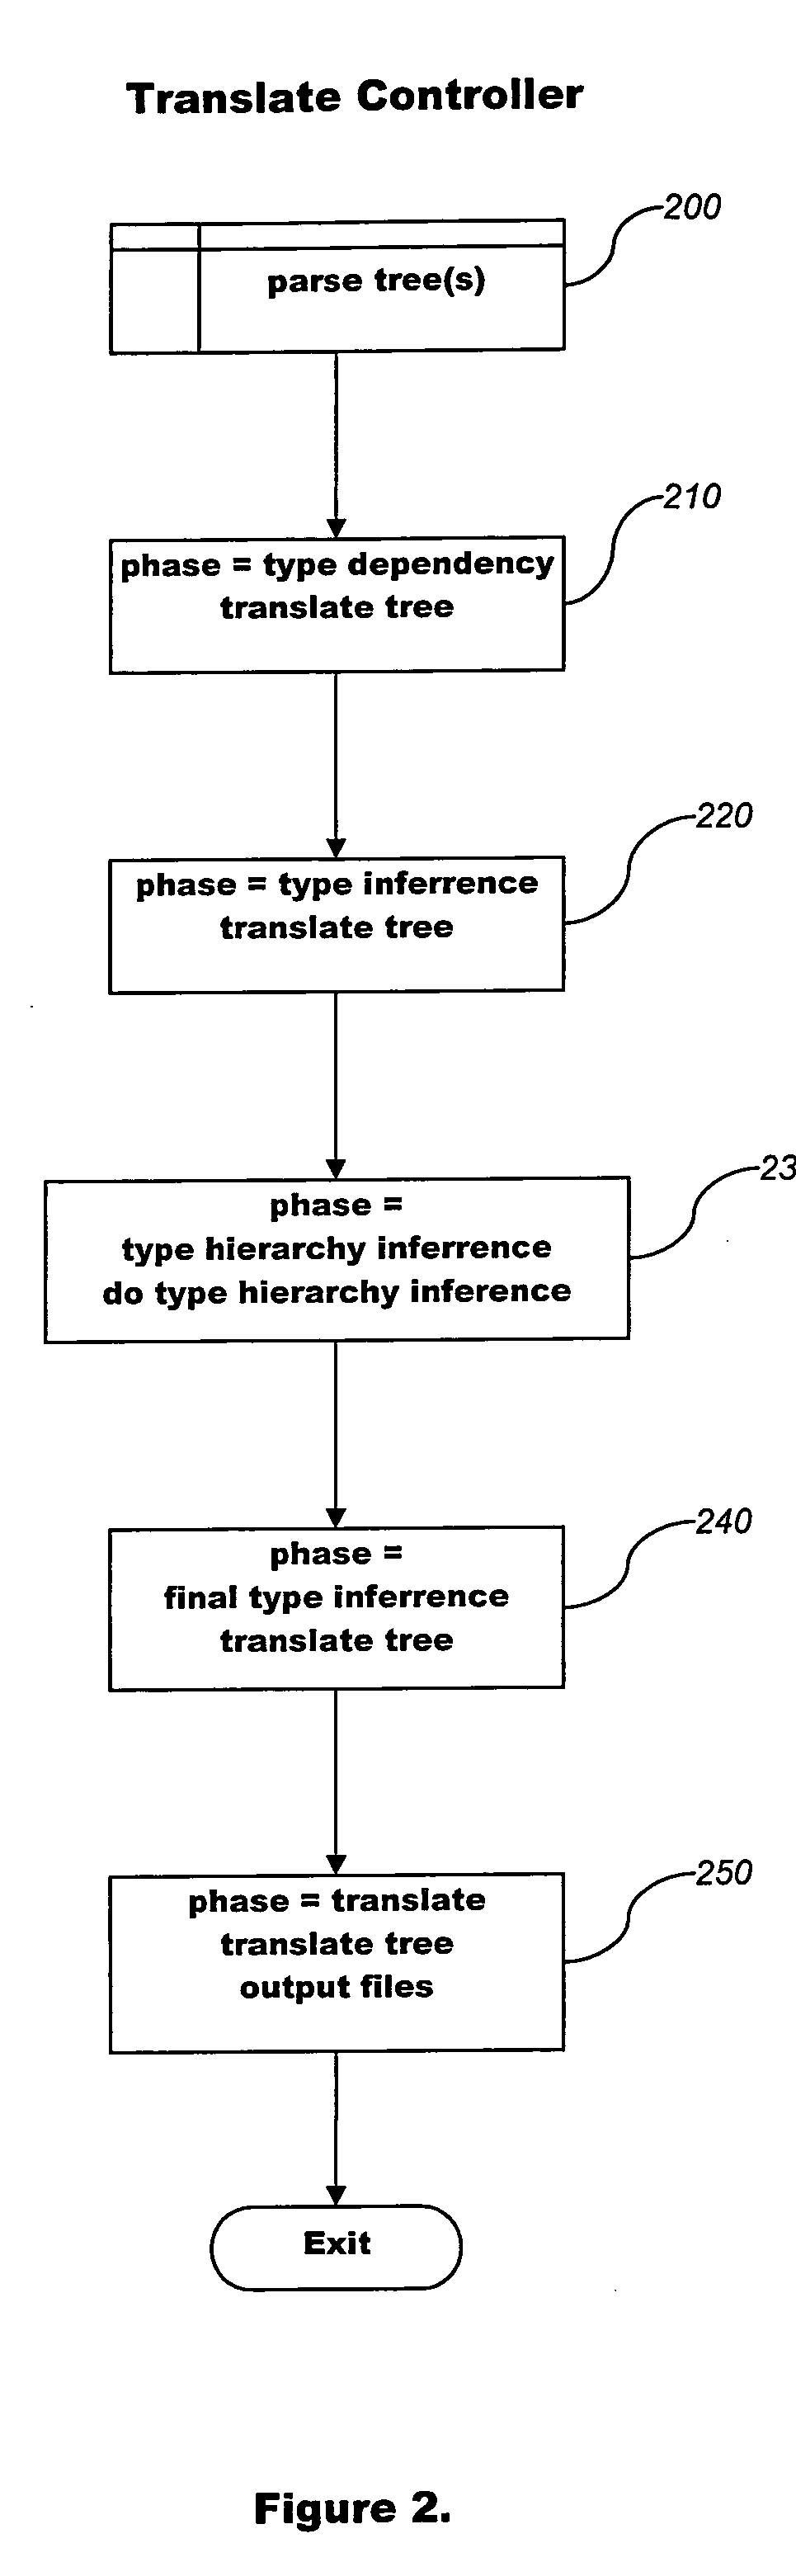 Method and apparatus for a cross-platform translator from VB.net to java